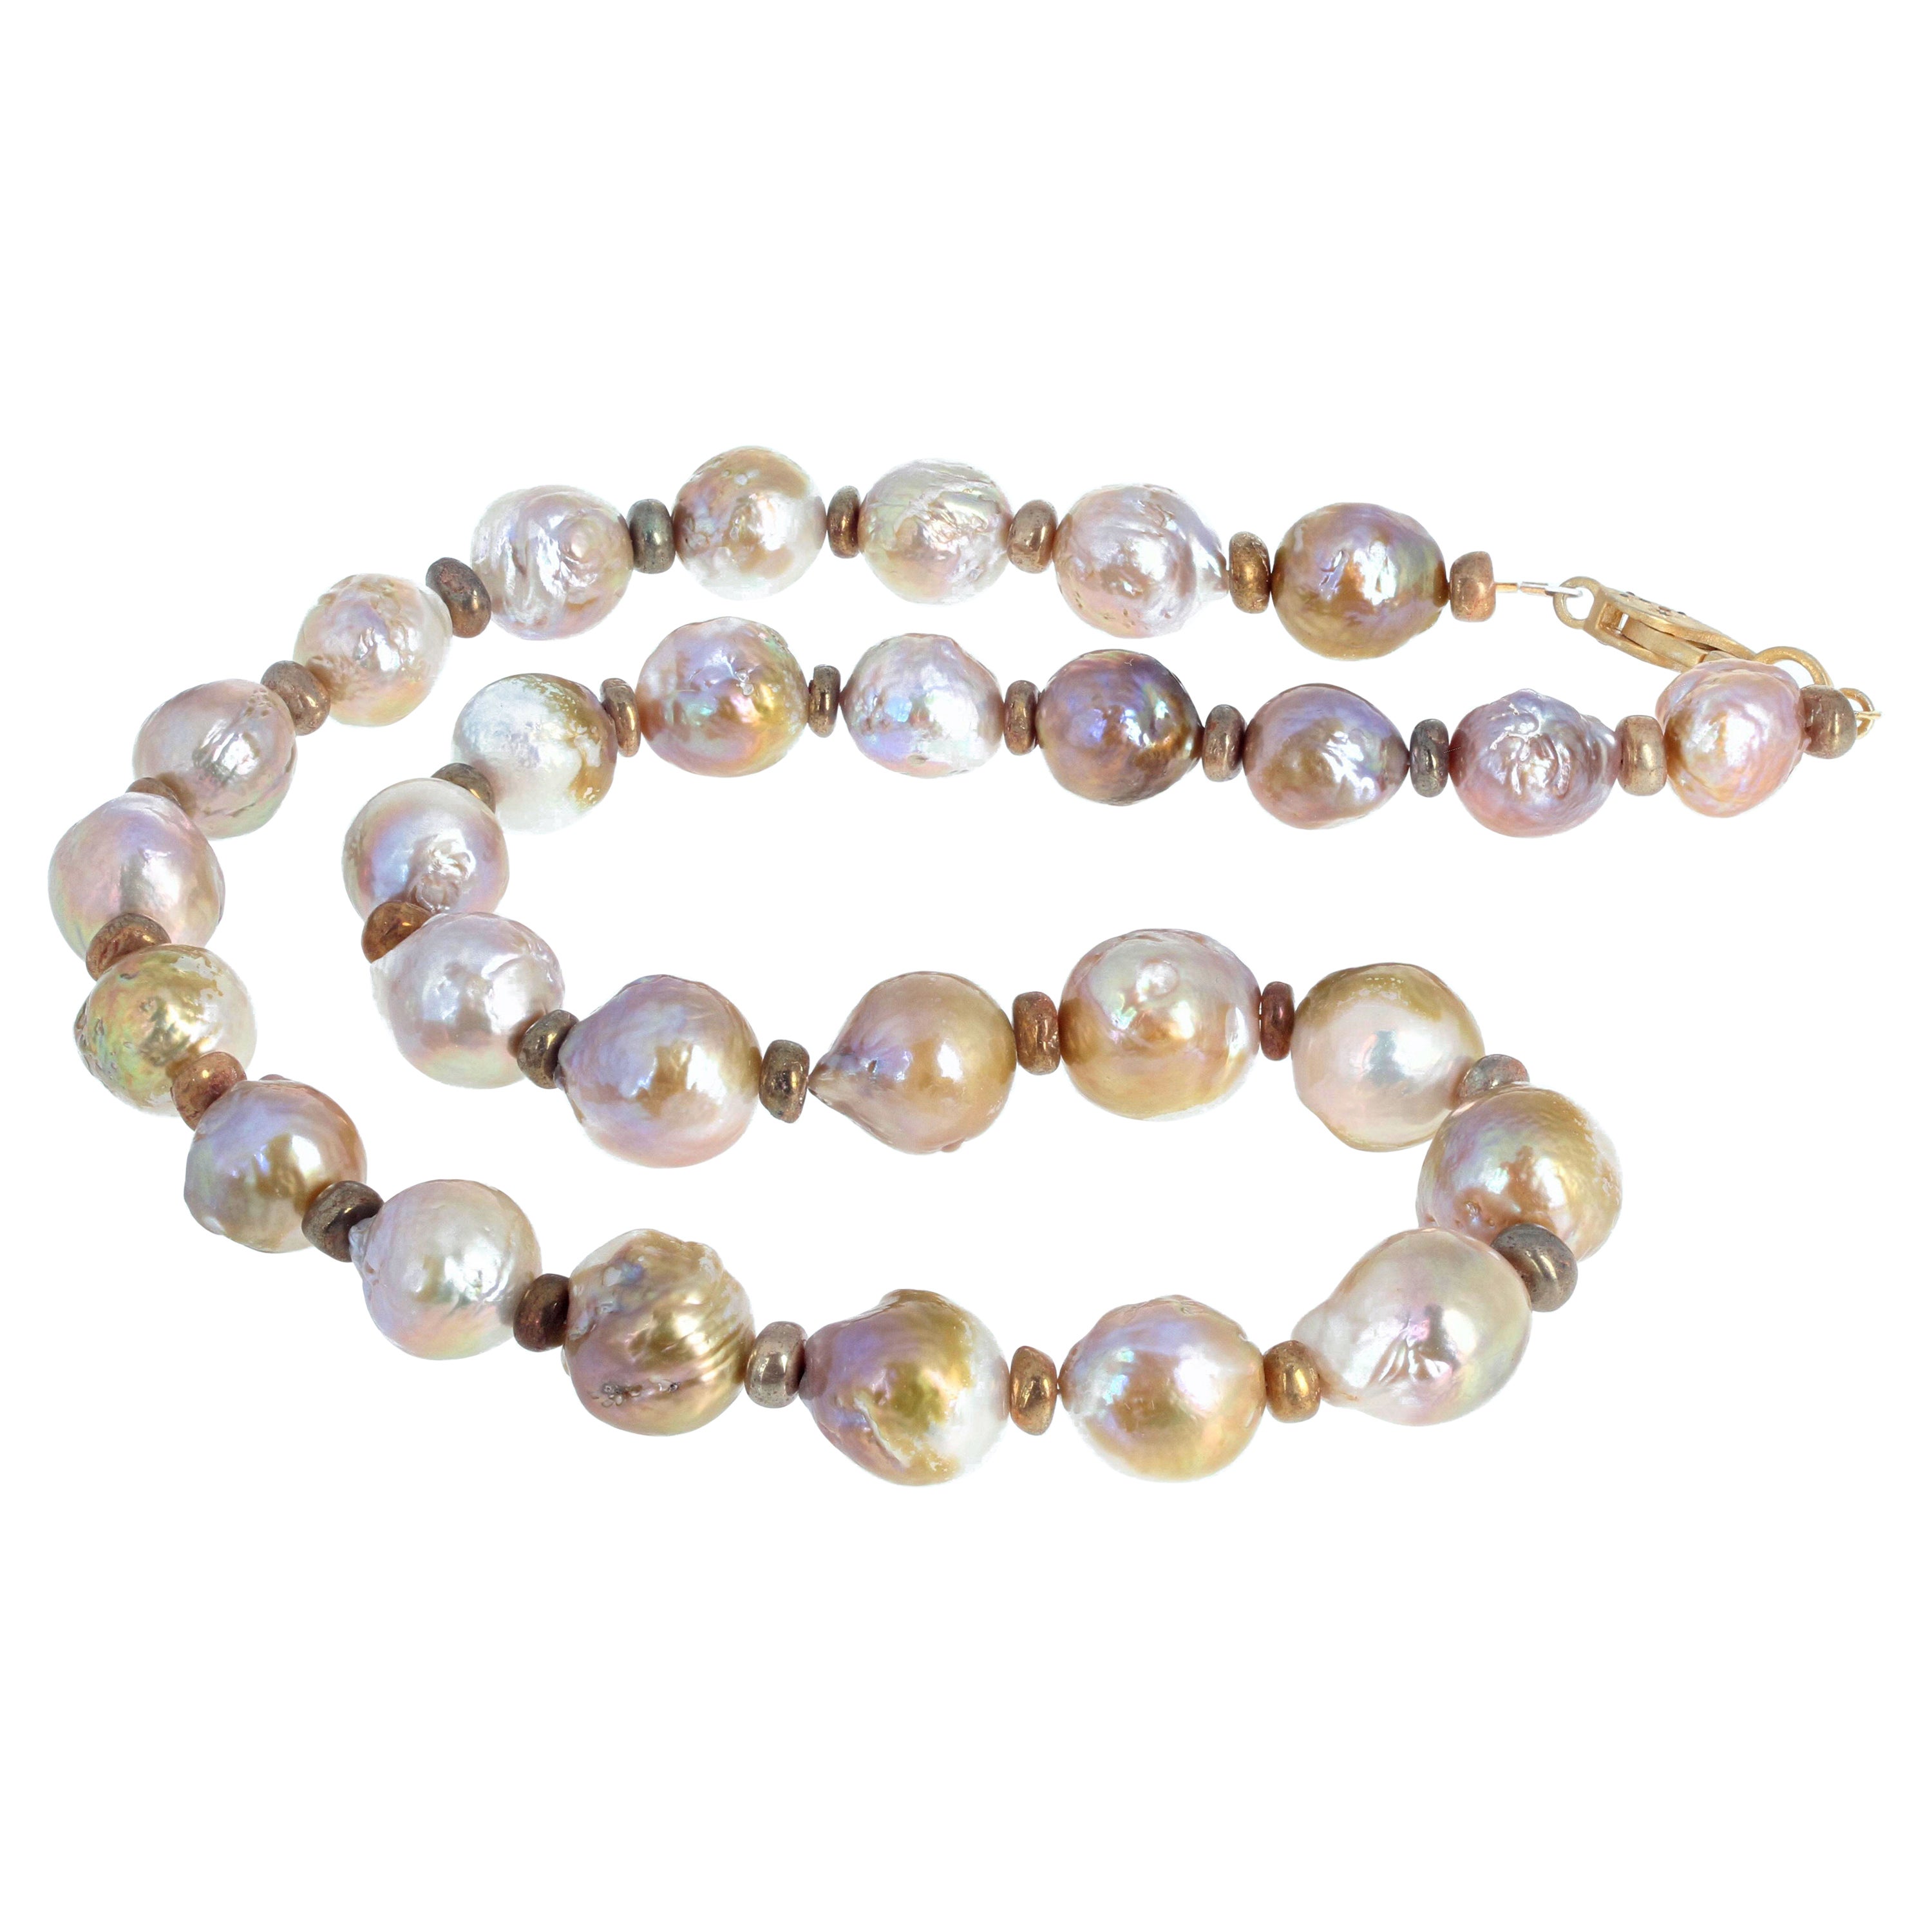 AJD Dramatic REAL Goldy Glowing Cultured Ocean Pearl Necklace